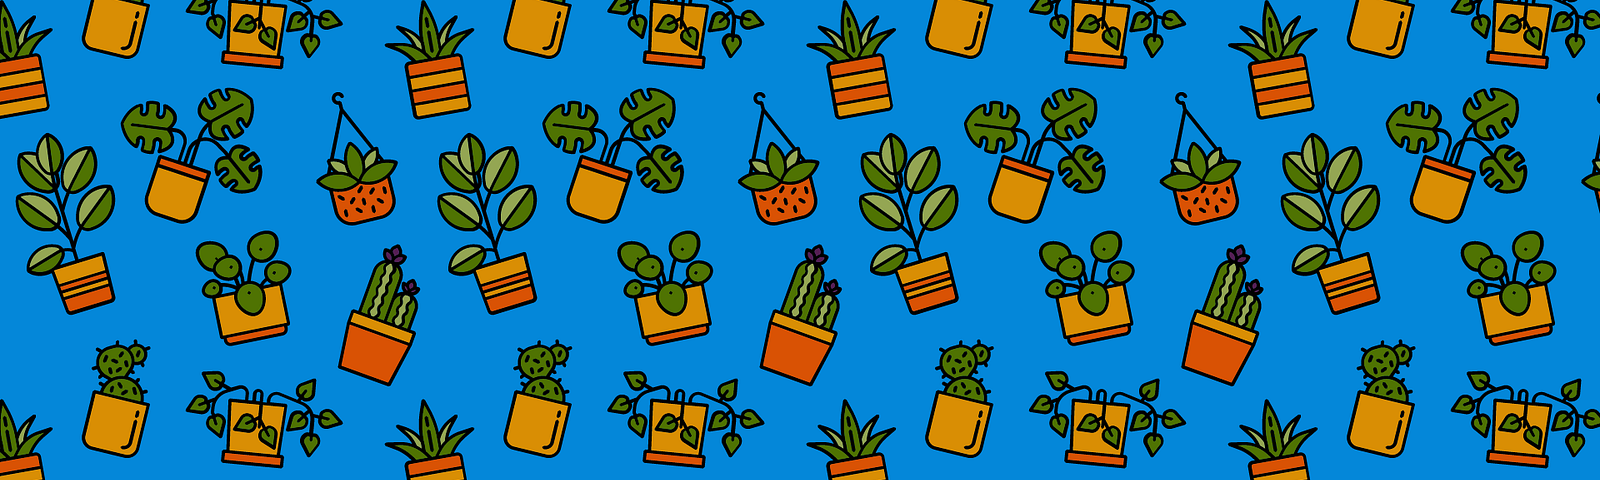 Colorful icons of potted plants arranged in a geometric repeating pattern. This is Noun Project’s guide to how to make a repeating pattern in Illustrator.